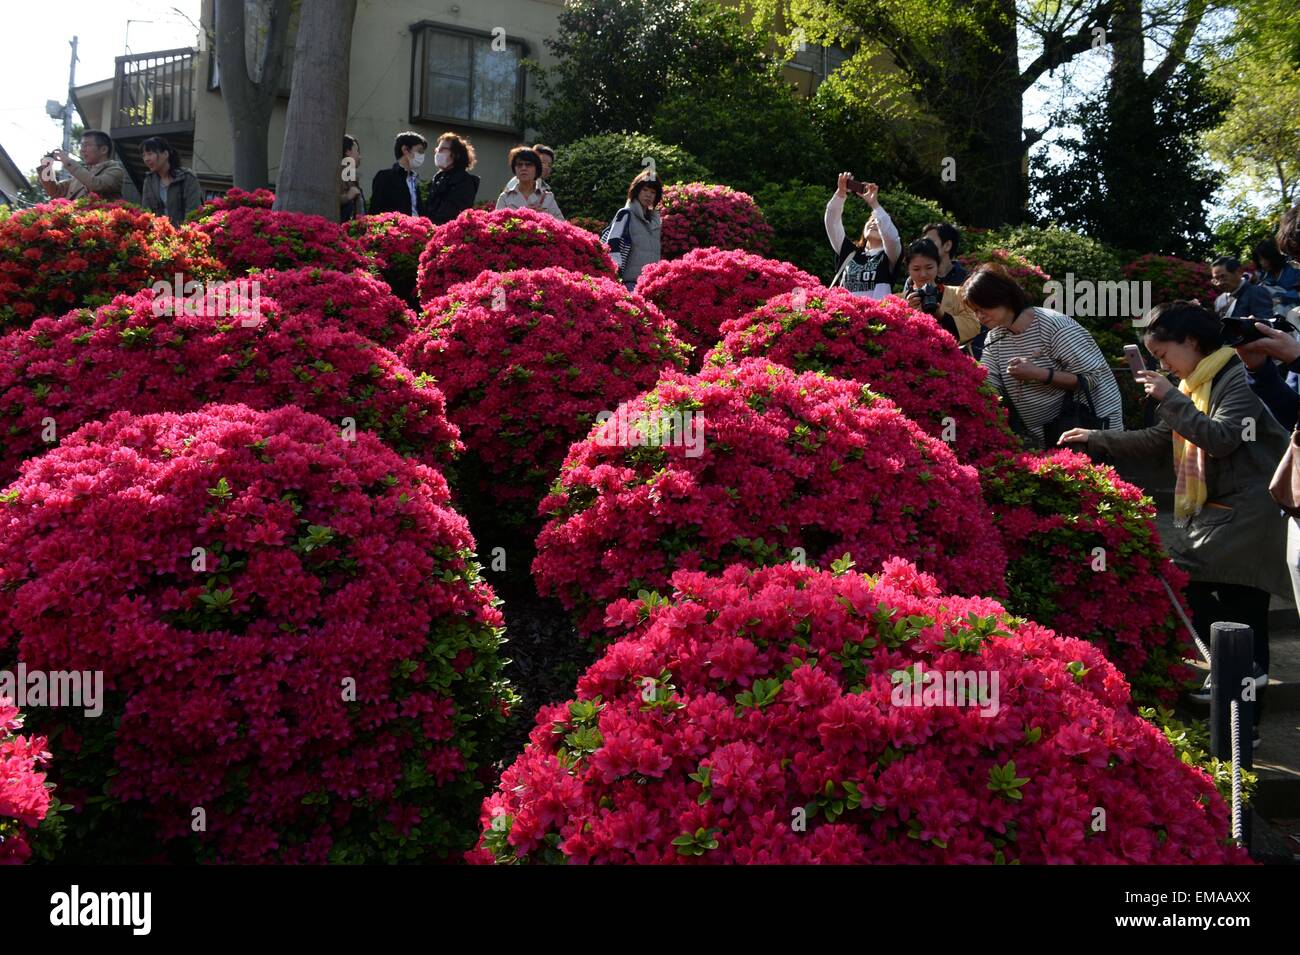 (150418) -- TOKYO, April 18, 2015 (Xinhua) -- Visitors appreciate Rhododendron flowers at the Nedu Jinja in Tokyo, Japan, April 18, 2015. Around 1000 species of rhododendron are in blossom here. (Xinhua/Ma Ping) (zcc) Stock Photo